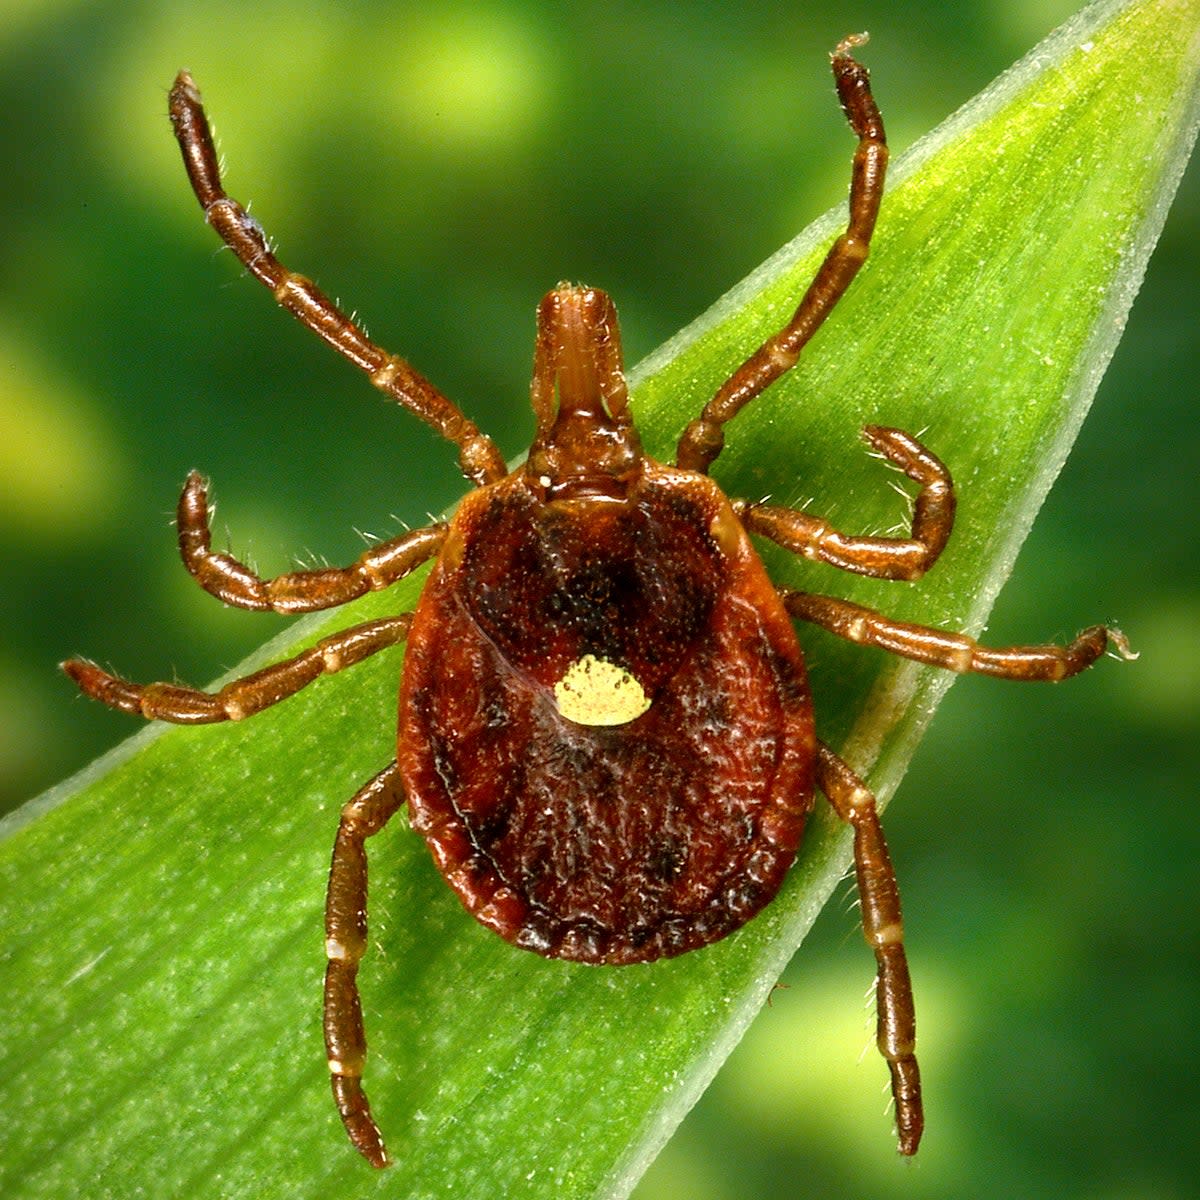 Female lone-star tick, known to spread AGS in the US (CDC)